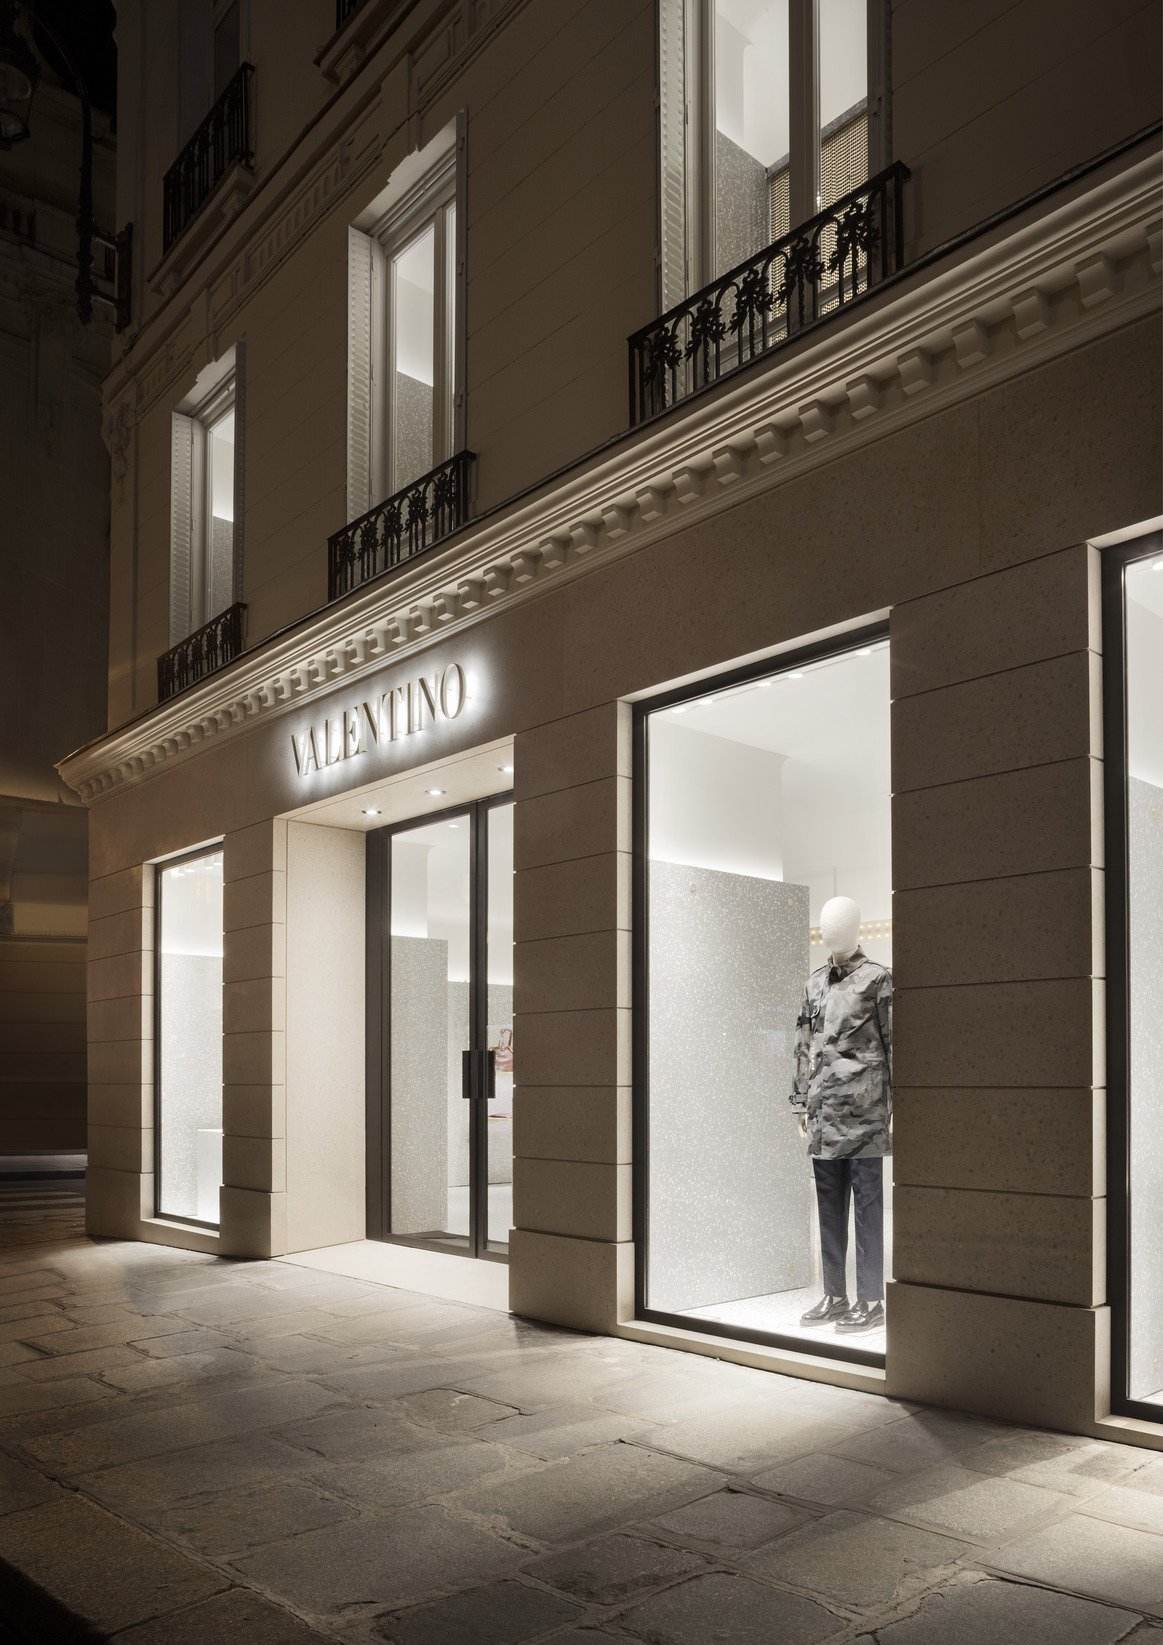 The Valentino Man store in Paris is characterised by spaces with a strong articulation of walls and partitions.